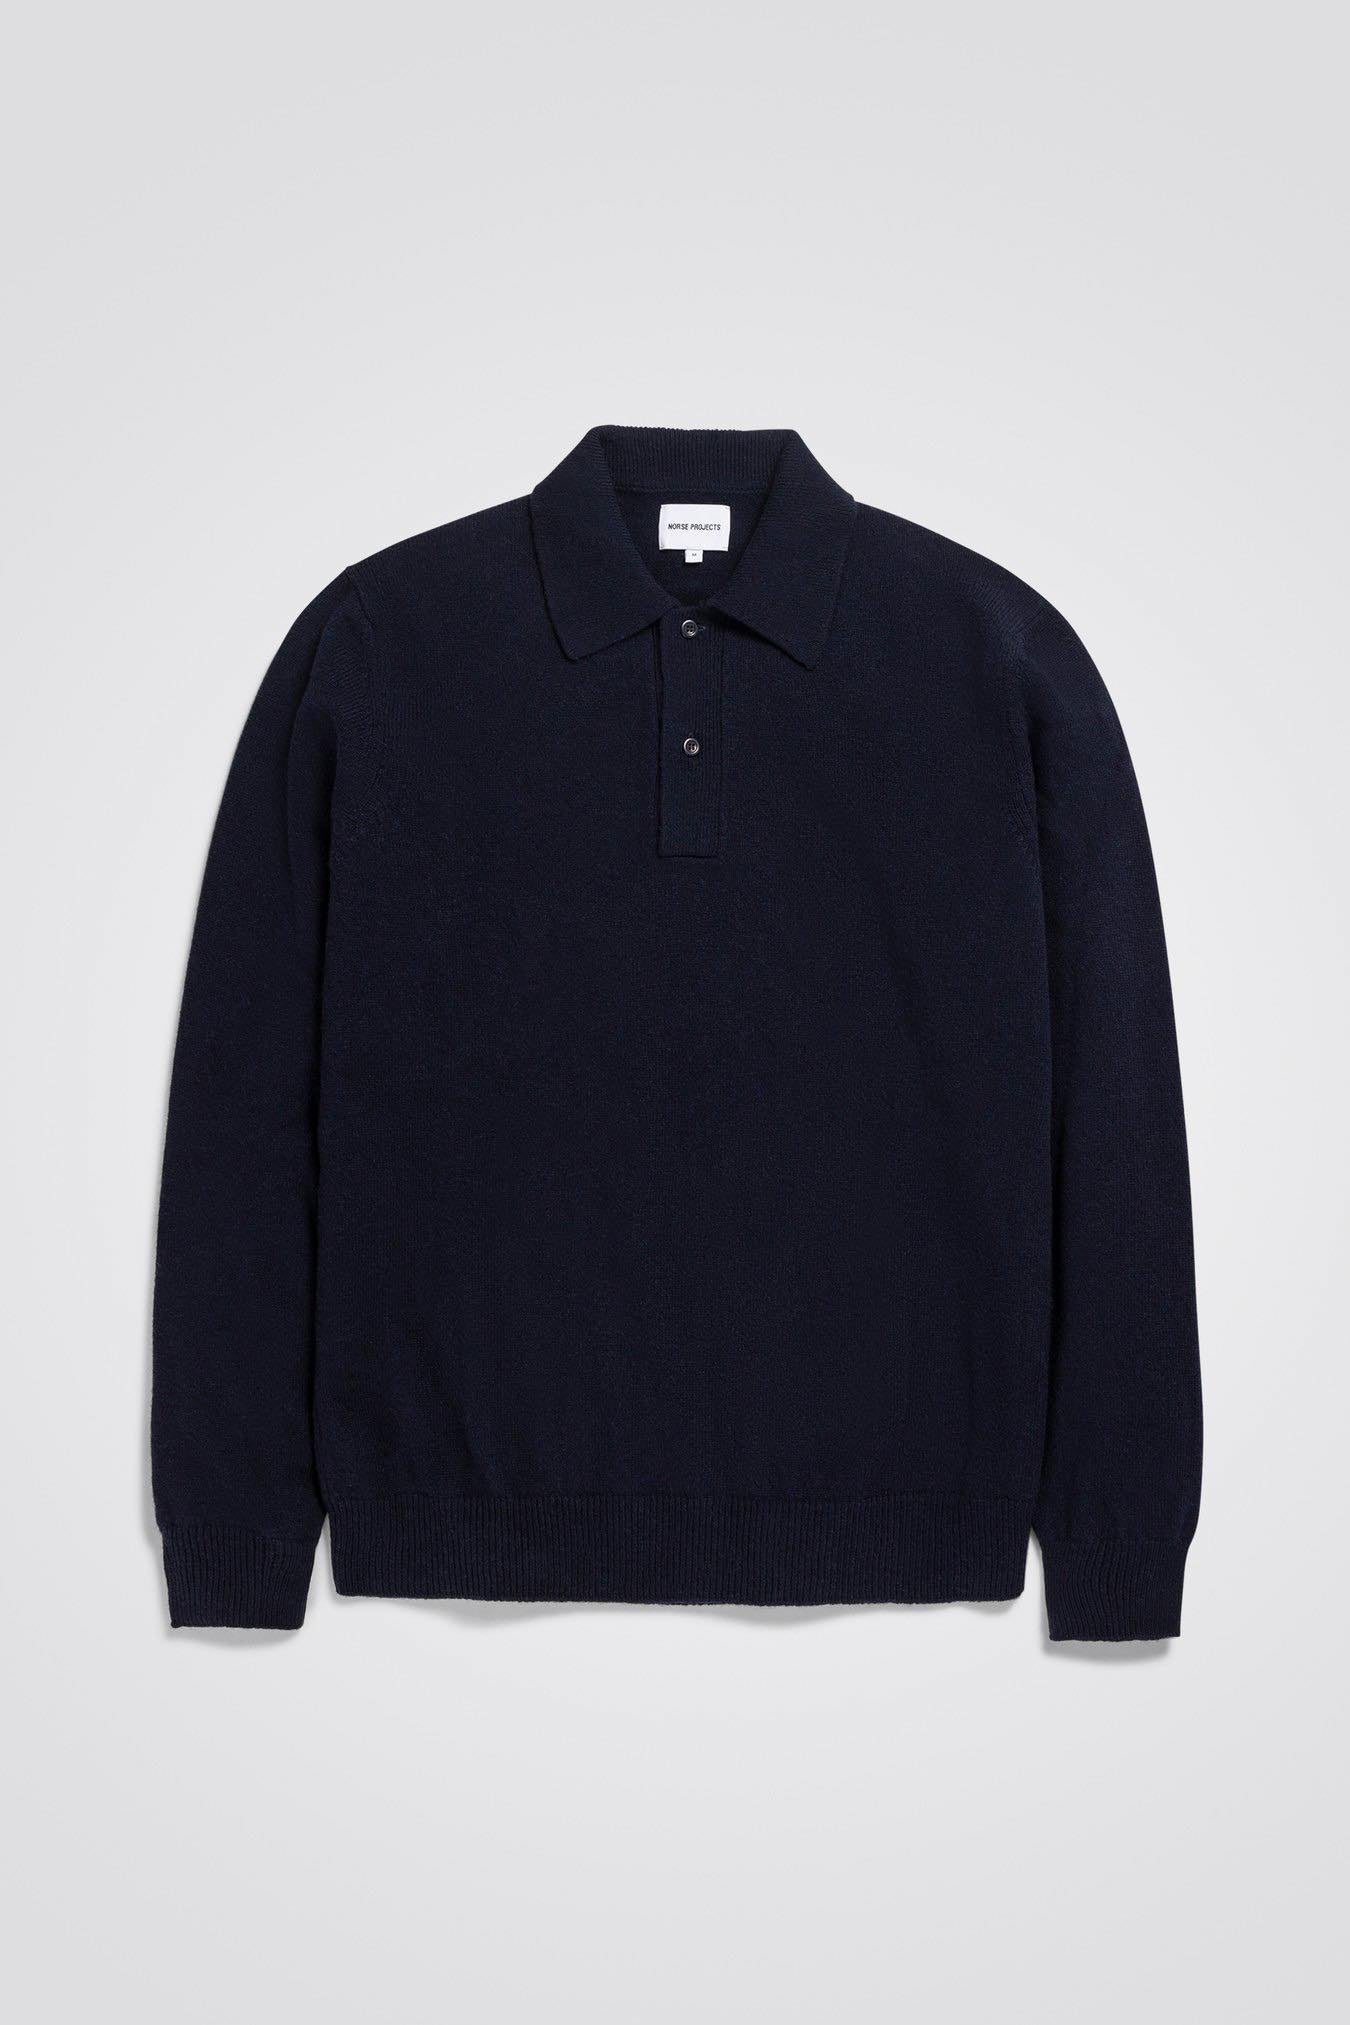 NORSE PROJECTS MARCO MERINO LAMBSWOOL POLO - DARK NAVY